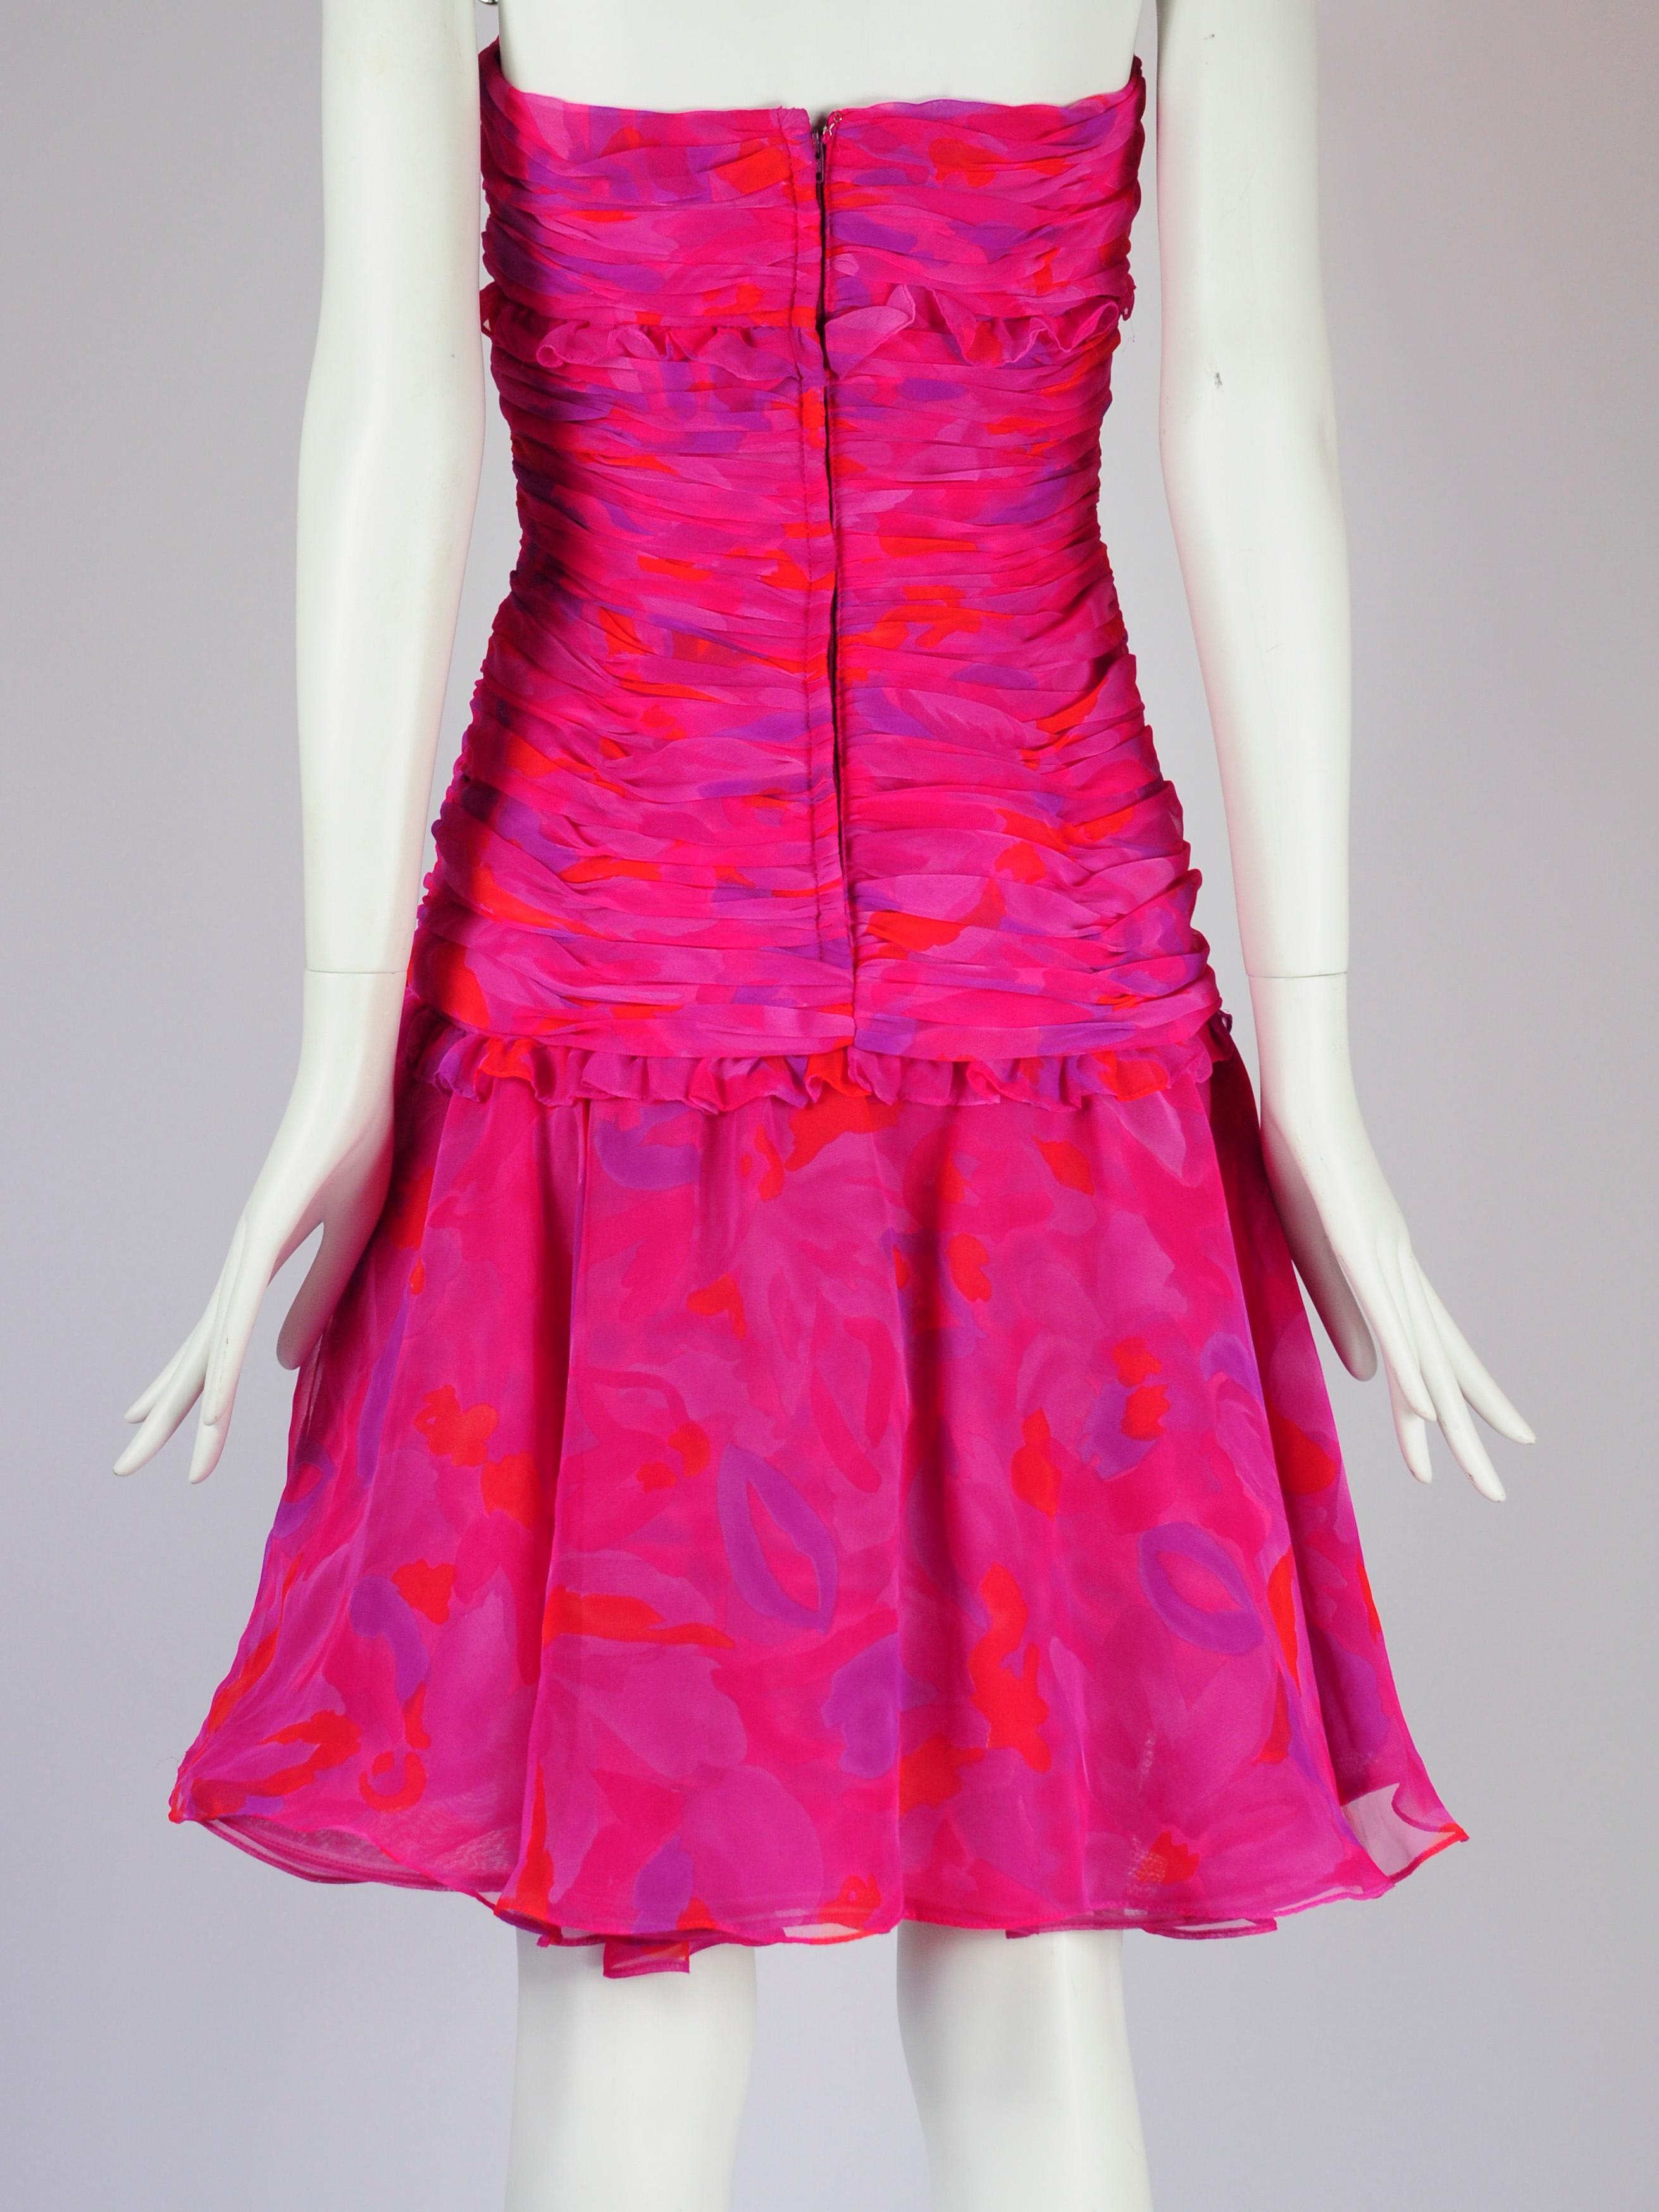 Women's Victor Costa for Saks Fifth Avenue Strapless Cocktail Dress Abstract Print 1980s For Sale